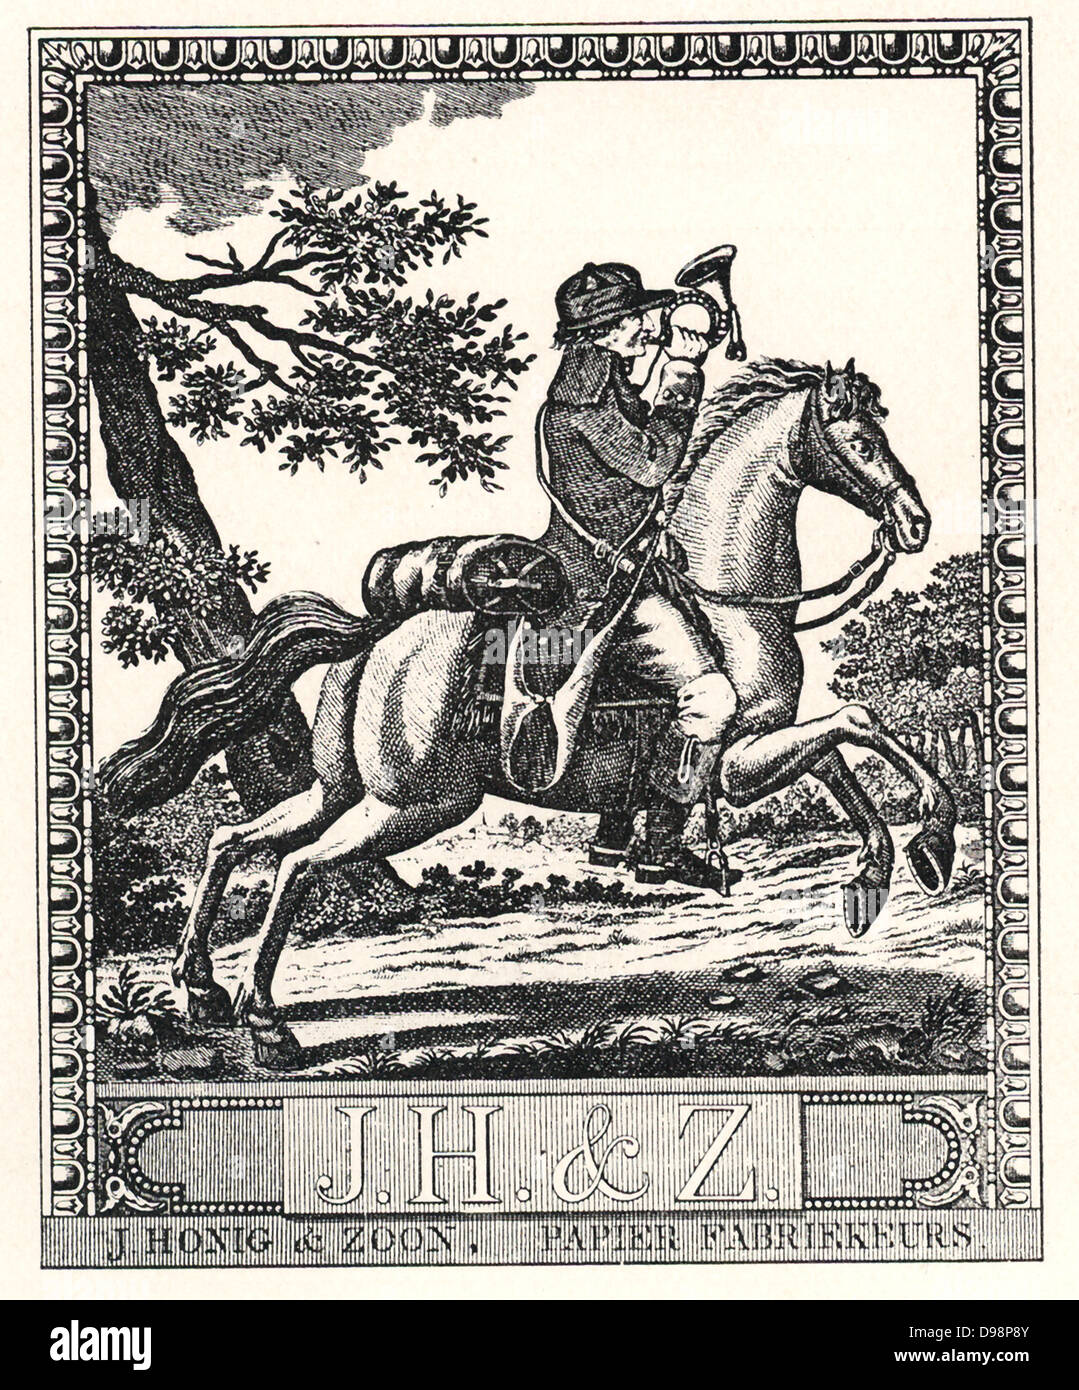 1799 woodcut showing a mounted postman blowing a trumpet as he delivers letters. Dutch Stock Photo